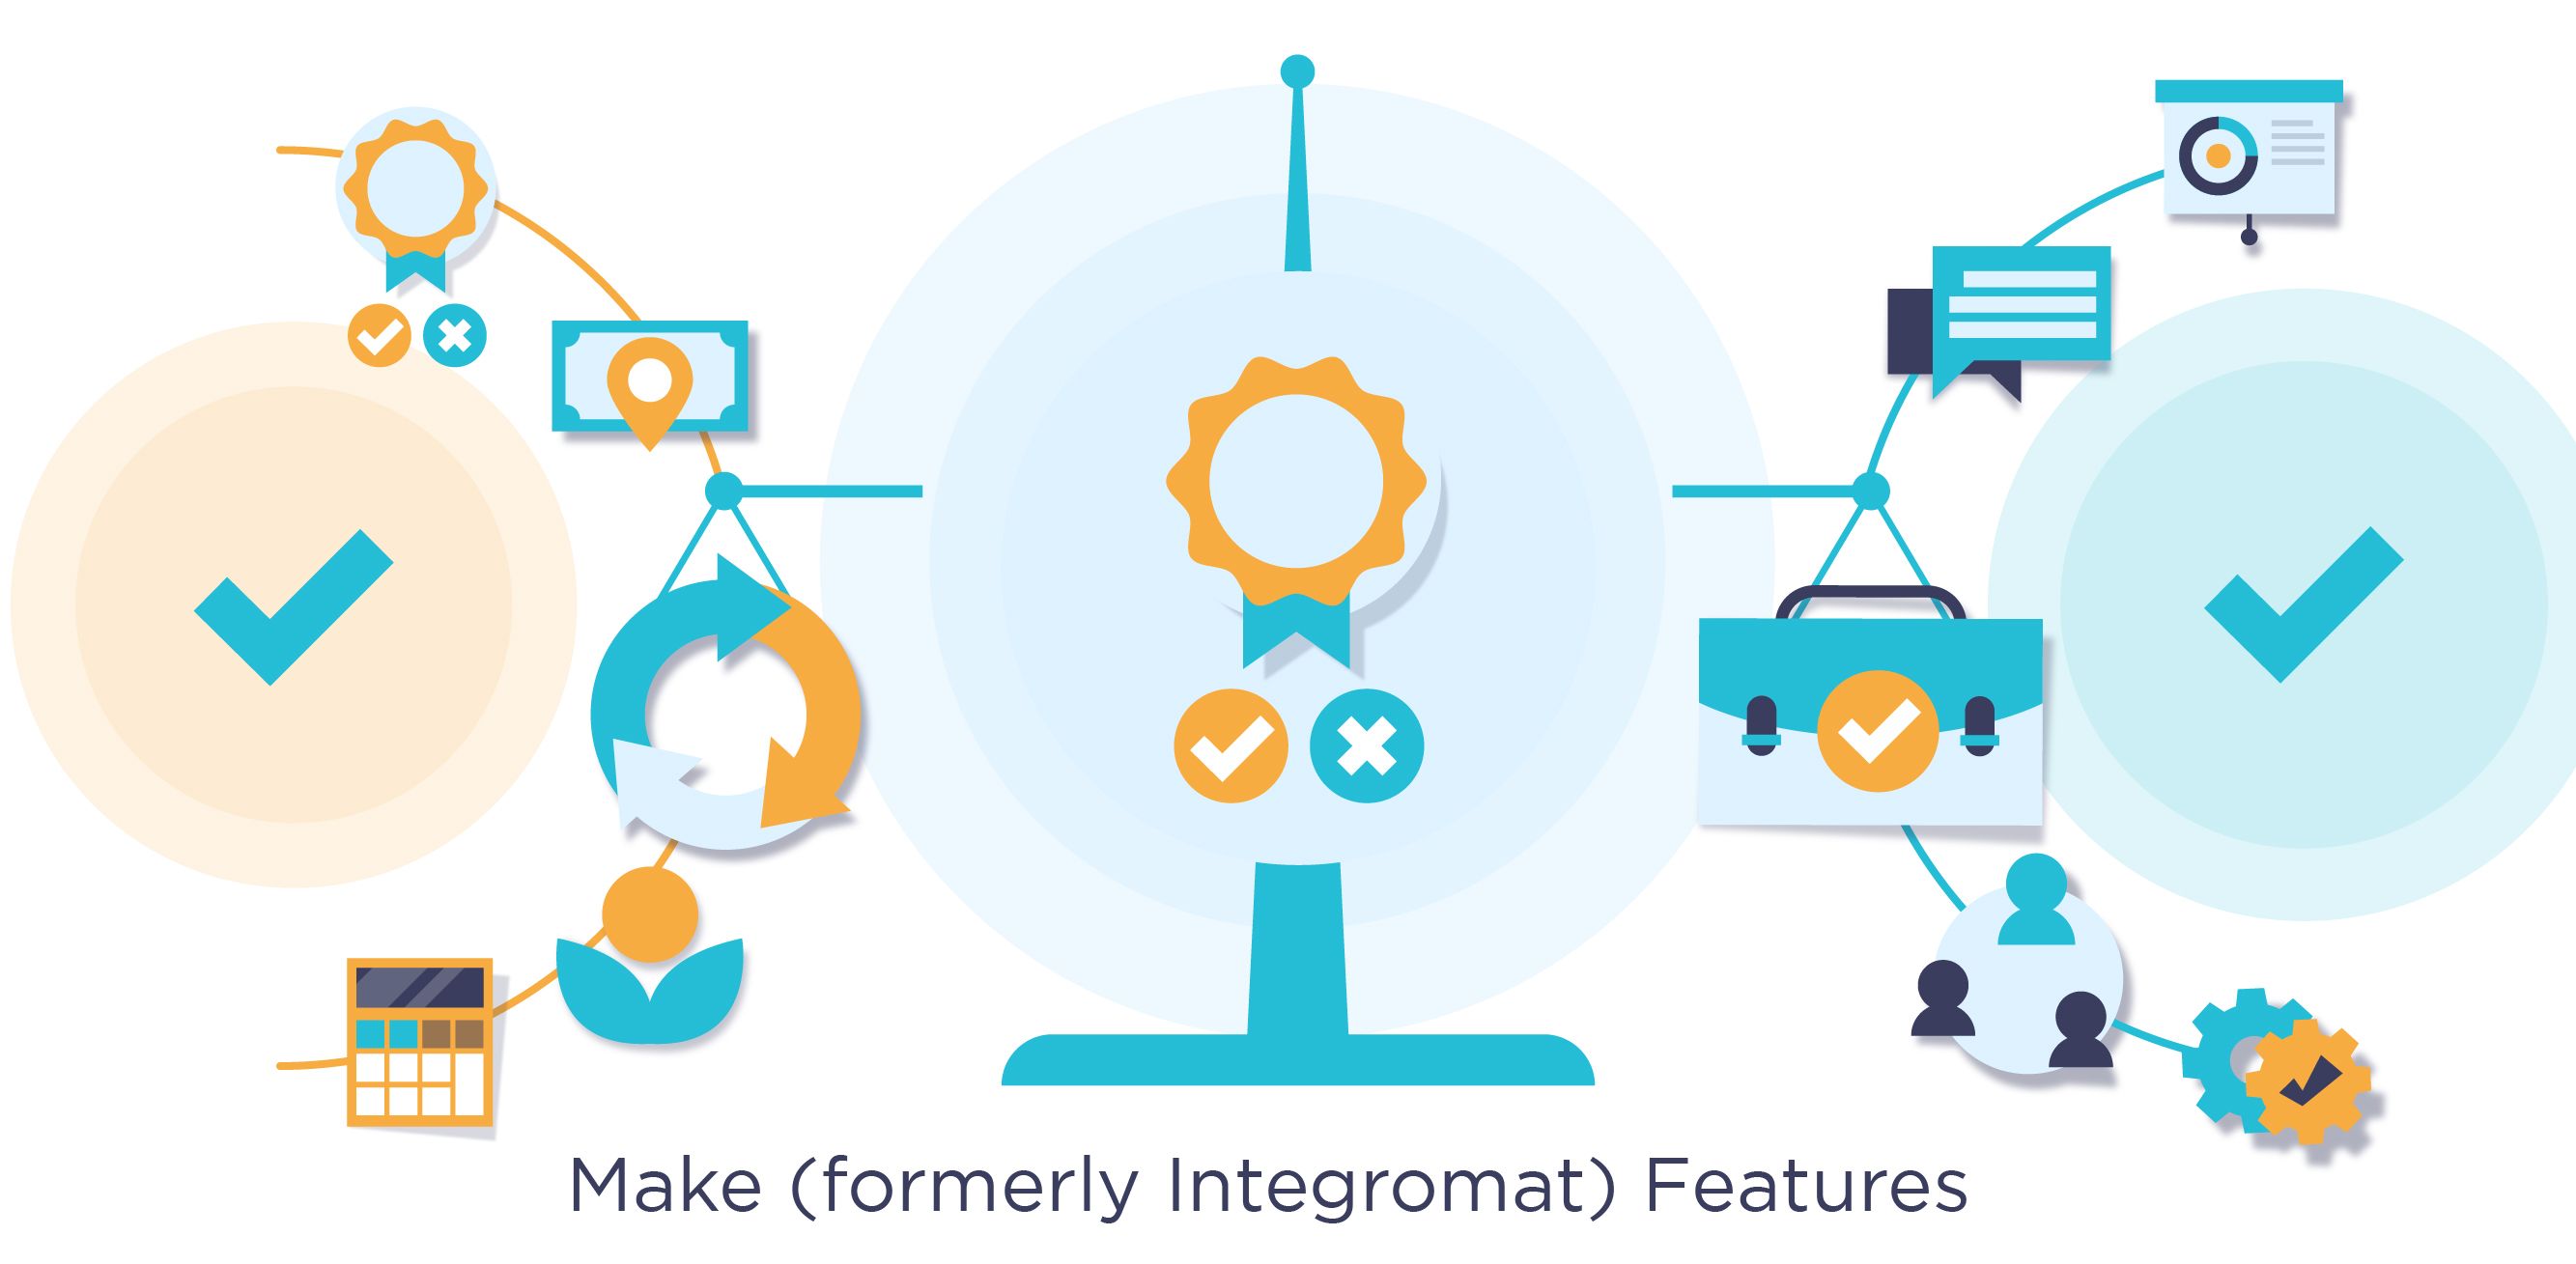 Make (formerly Integromat) Features